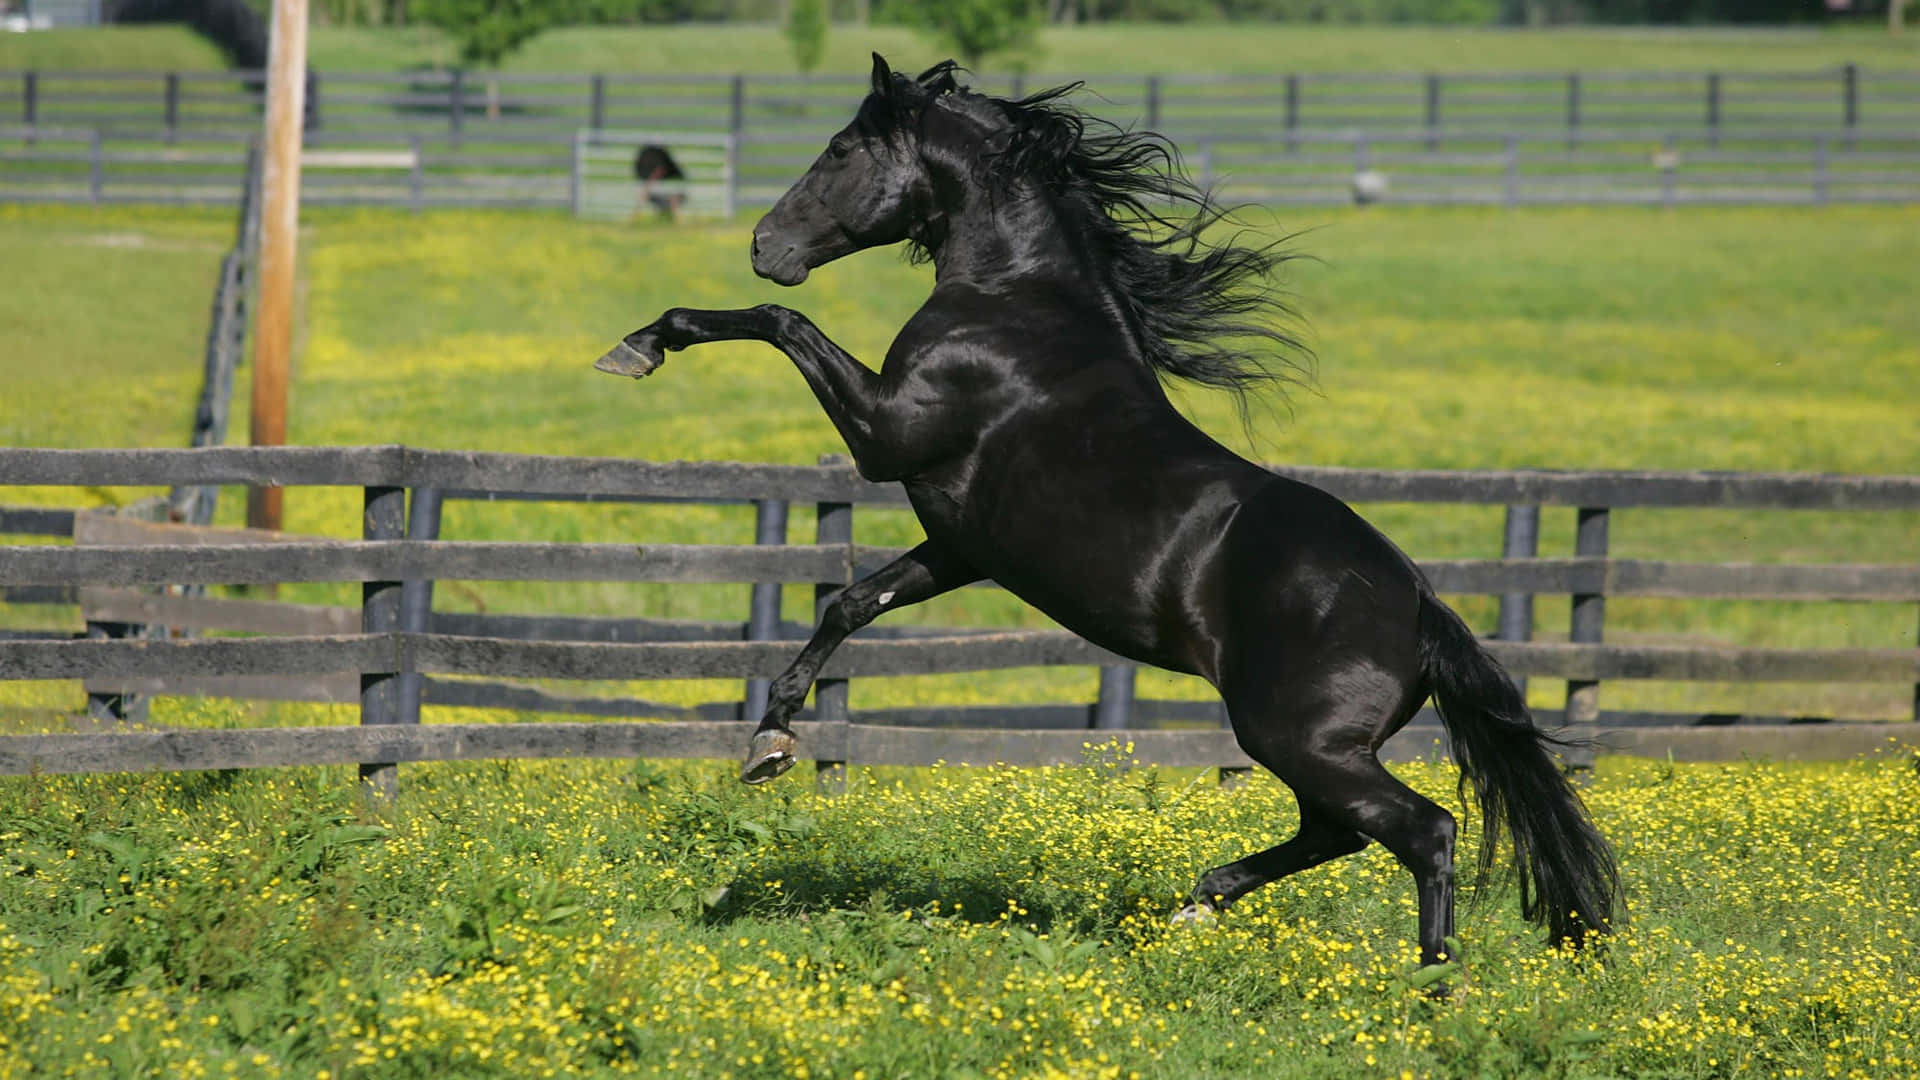 Majestic black horse in a pastoral setting